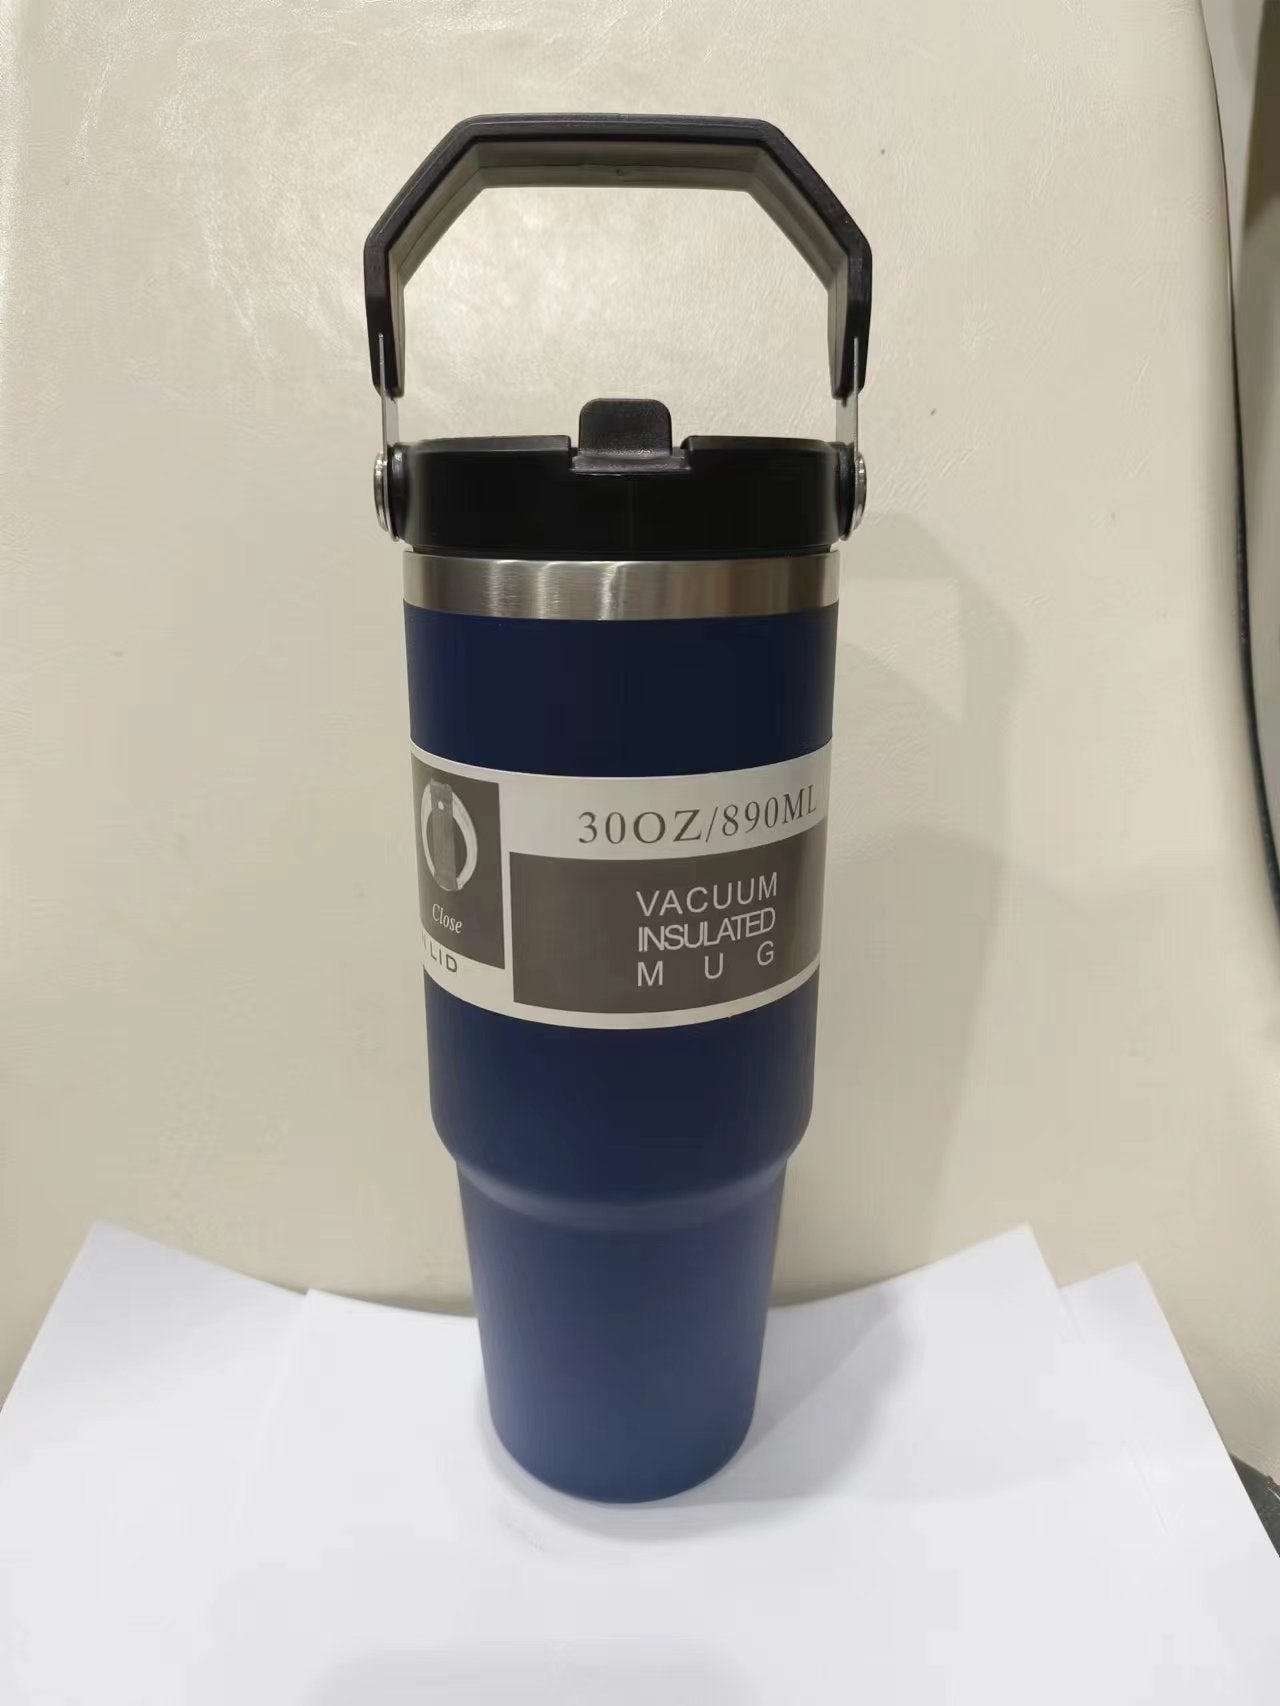 Portable Car Cup Stainless Steel Cup Travel Sports Water Bottle The Khan Shop